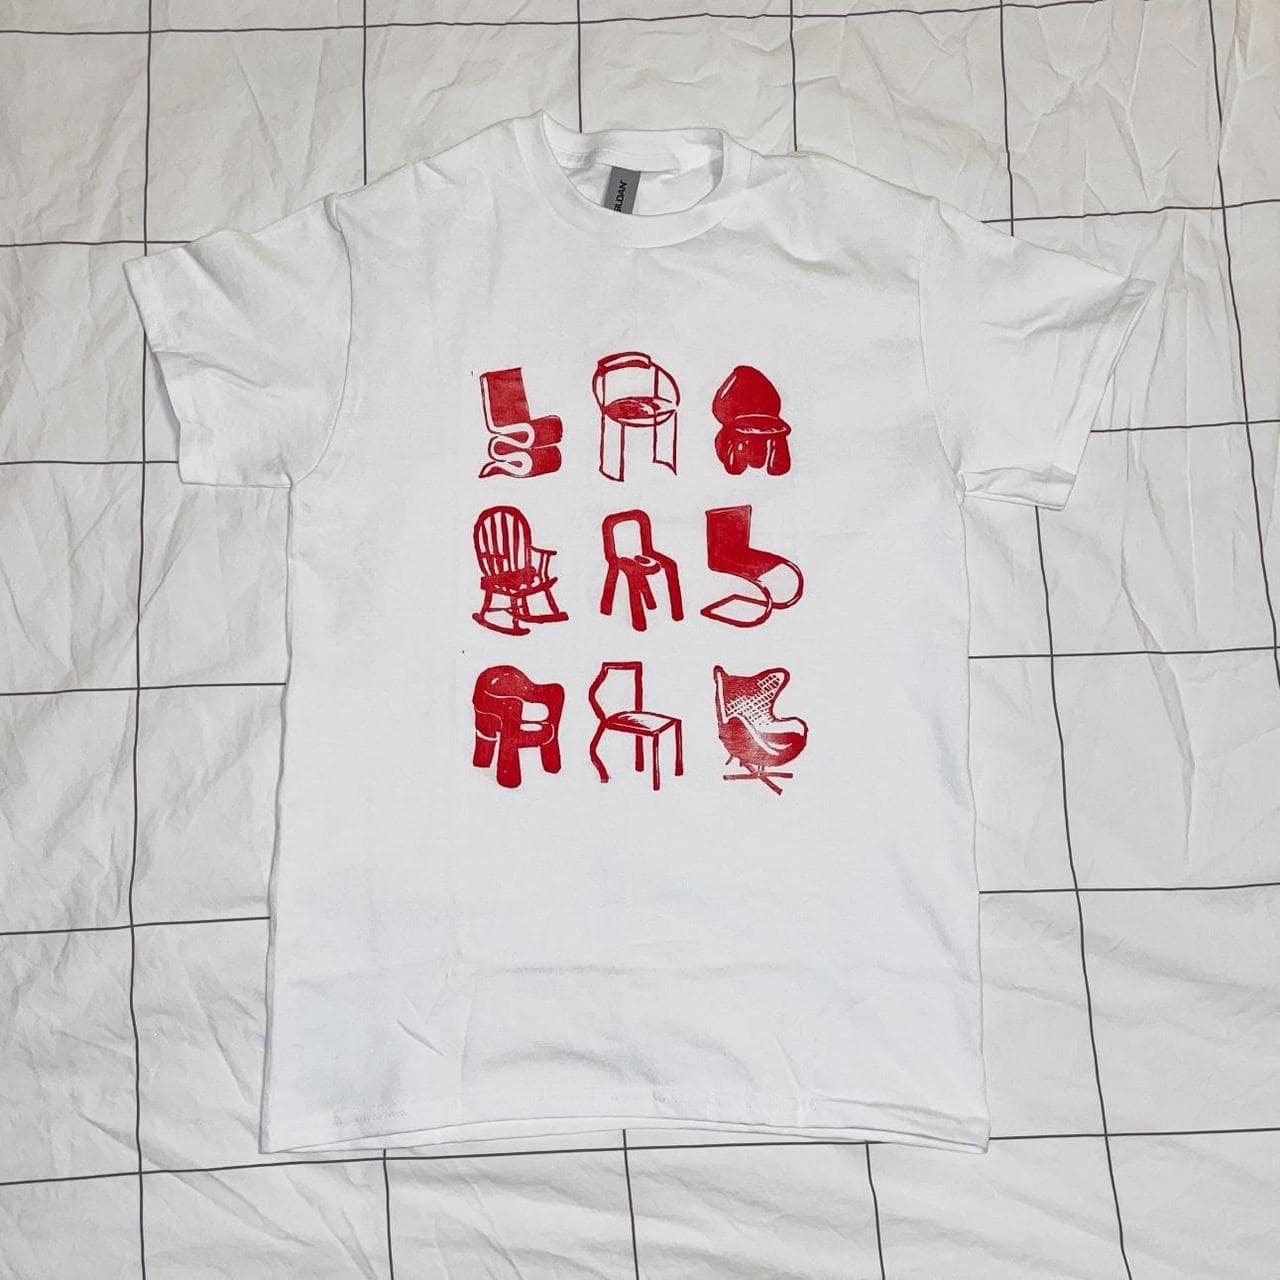 White t-shirt with red collage of different chair designs